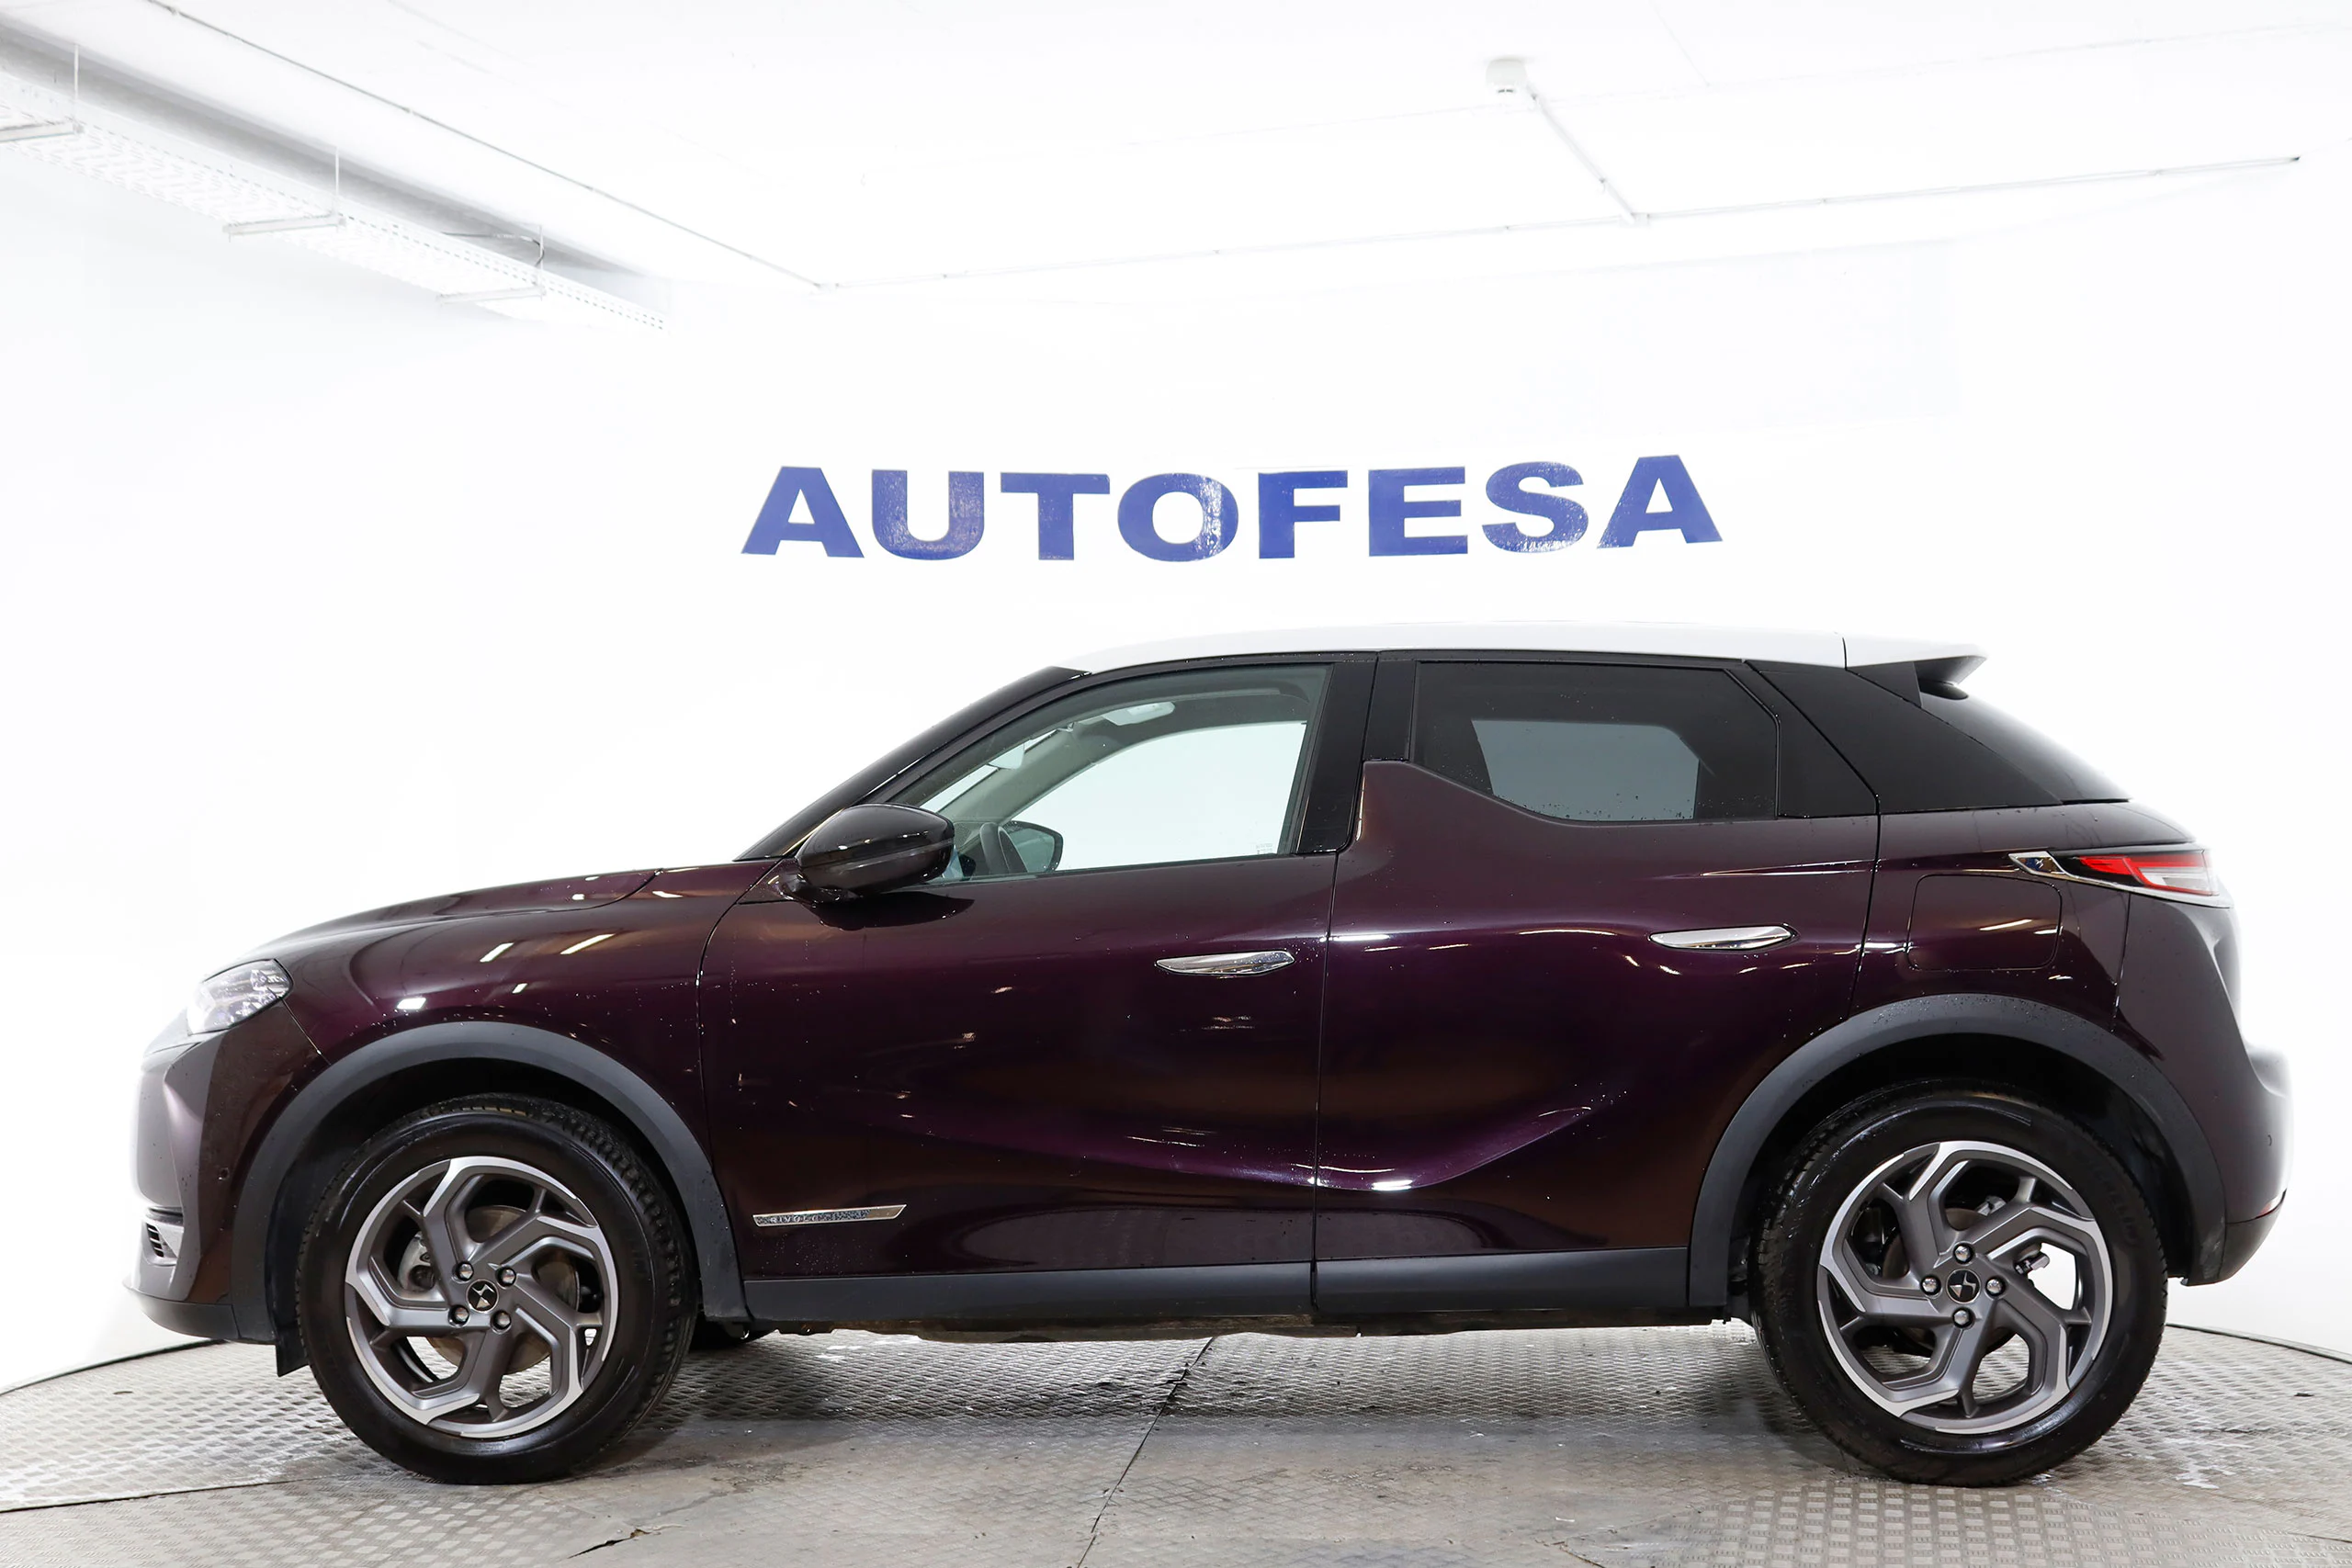 DS DS 3 Crossback 1.2 Grand Chic 130cv Auto 5P S/S # NAVY, FAROS LED - Foto 5